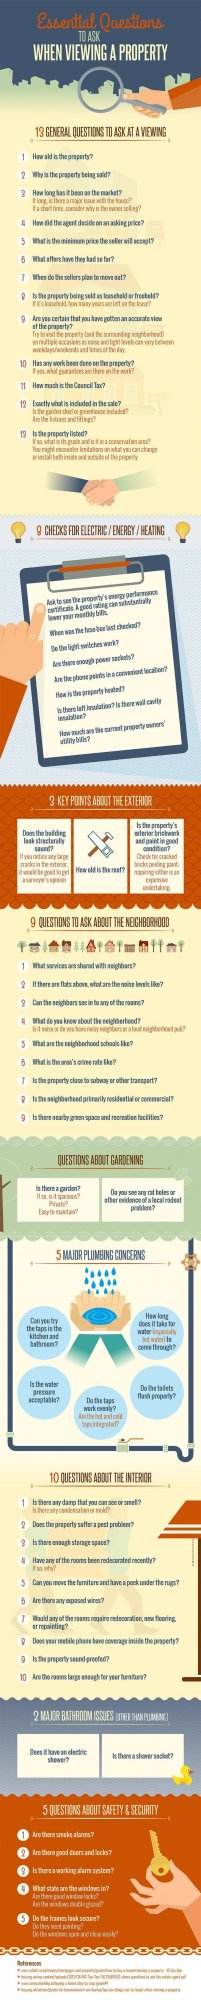 57 Important Questions To Ask When Viewing A Property For Sale best time to buy